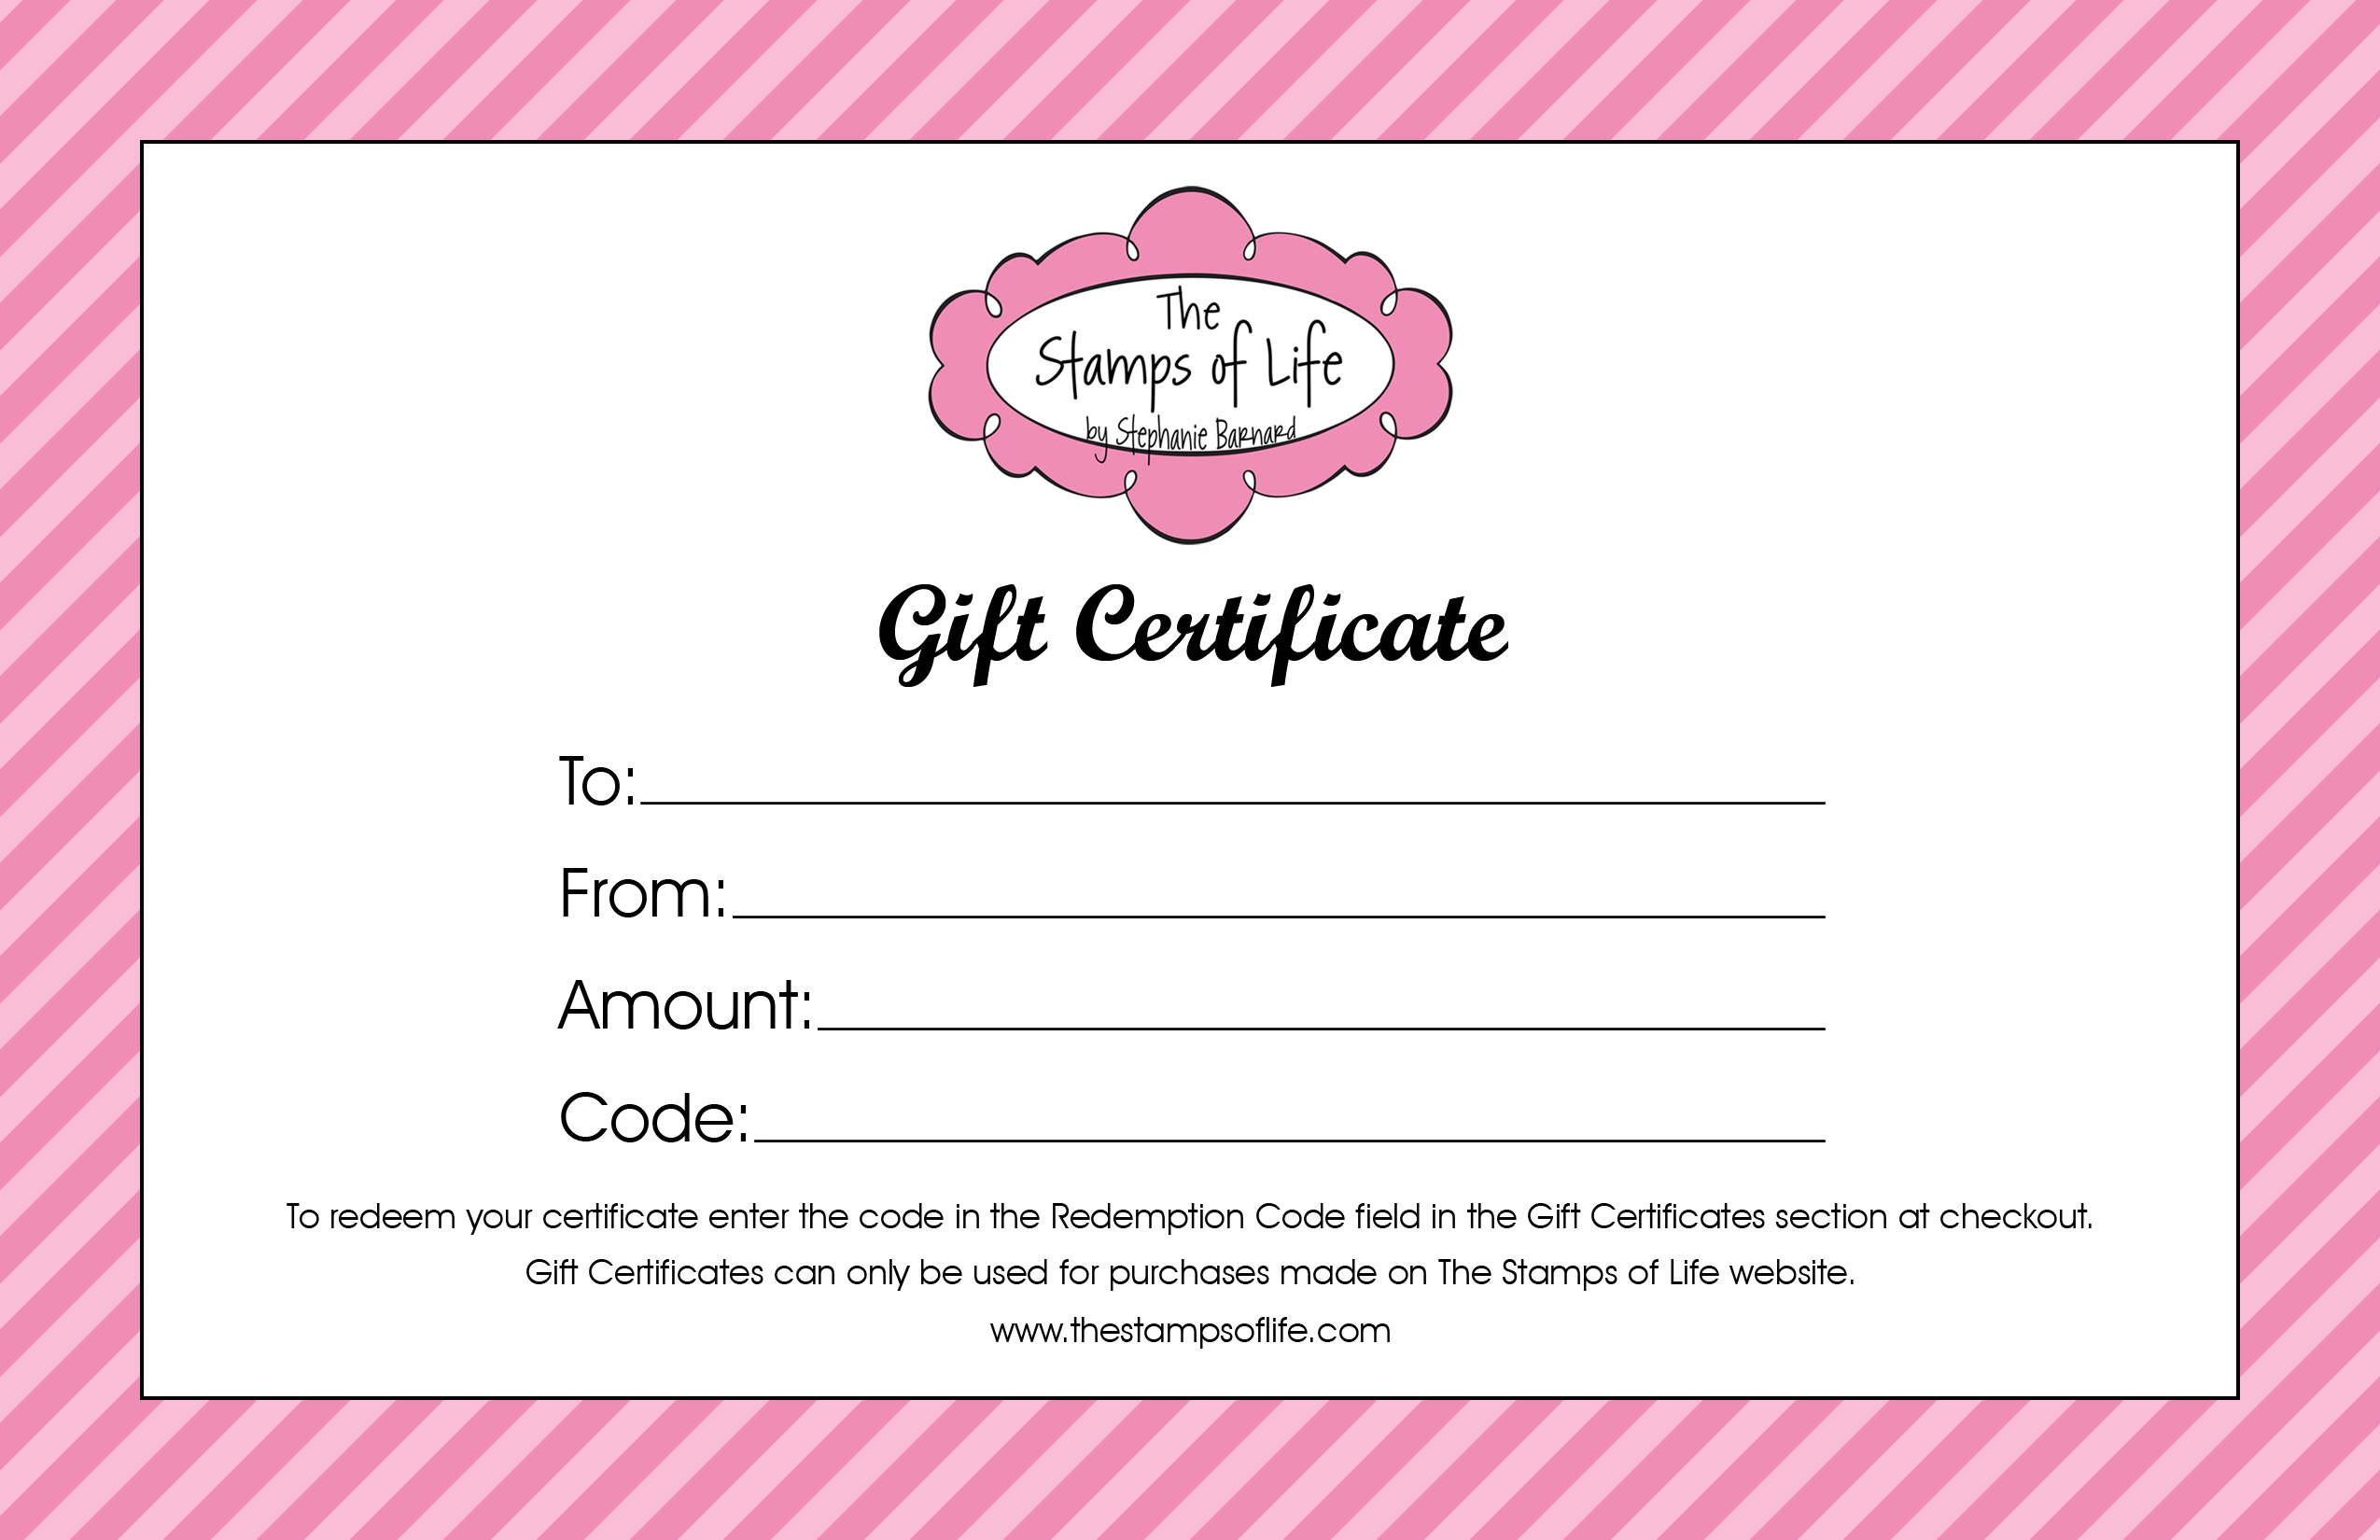 5 Best Images of Fill In Certificates Printable - Free Printable Fill